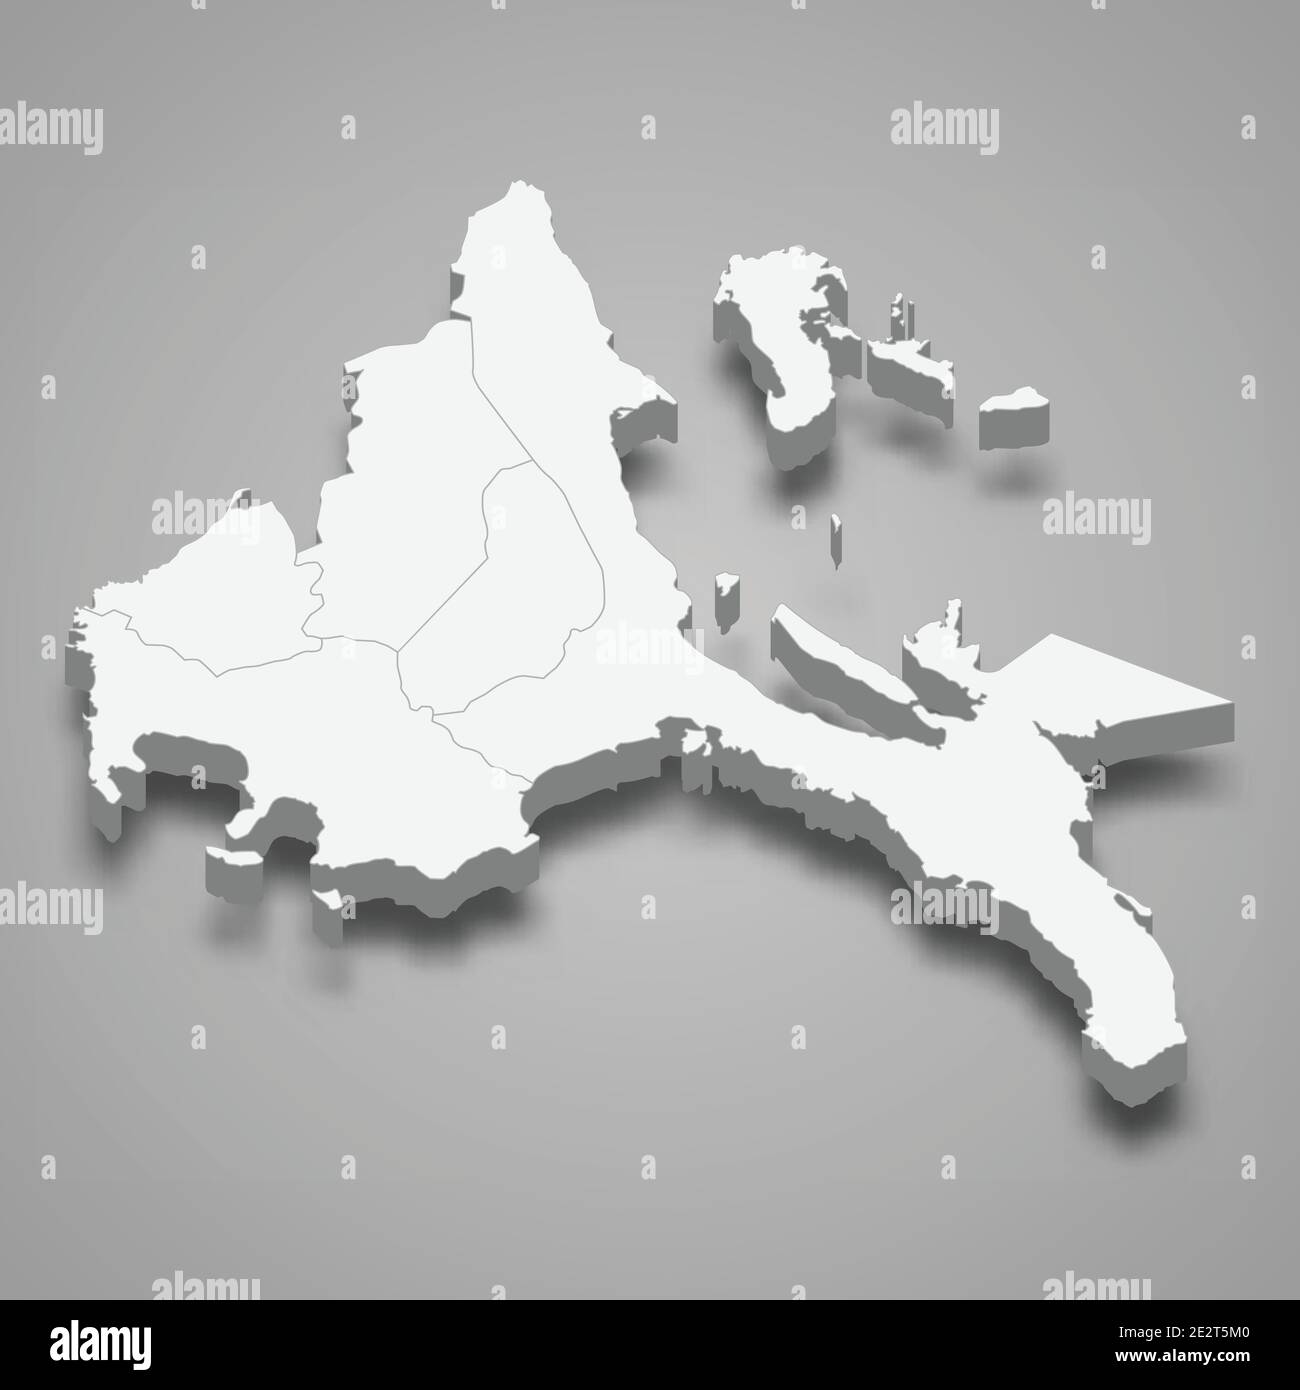 3d isometric map of Calabarzon is a region of Philippines, vector illustration Stock Vector